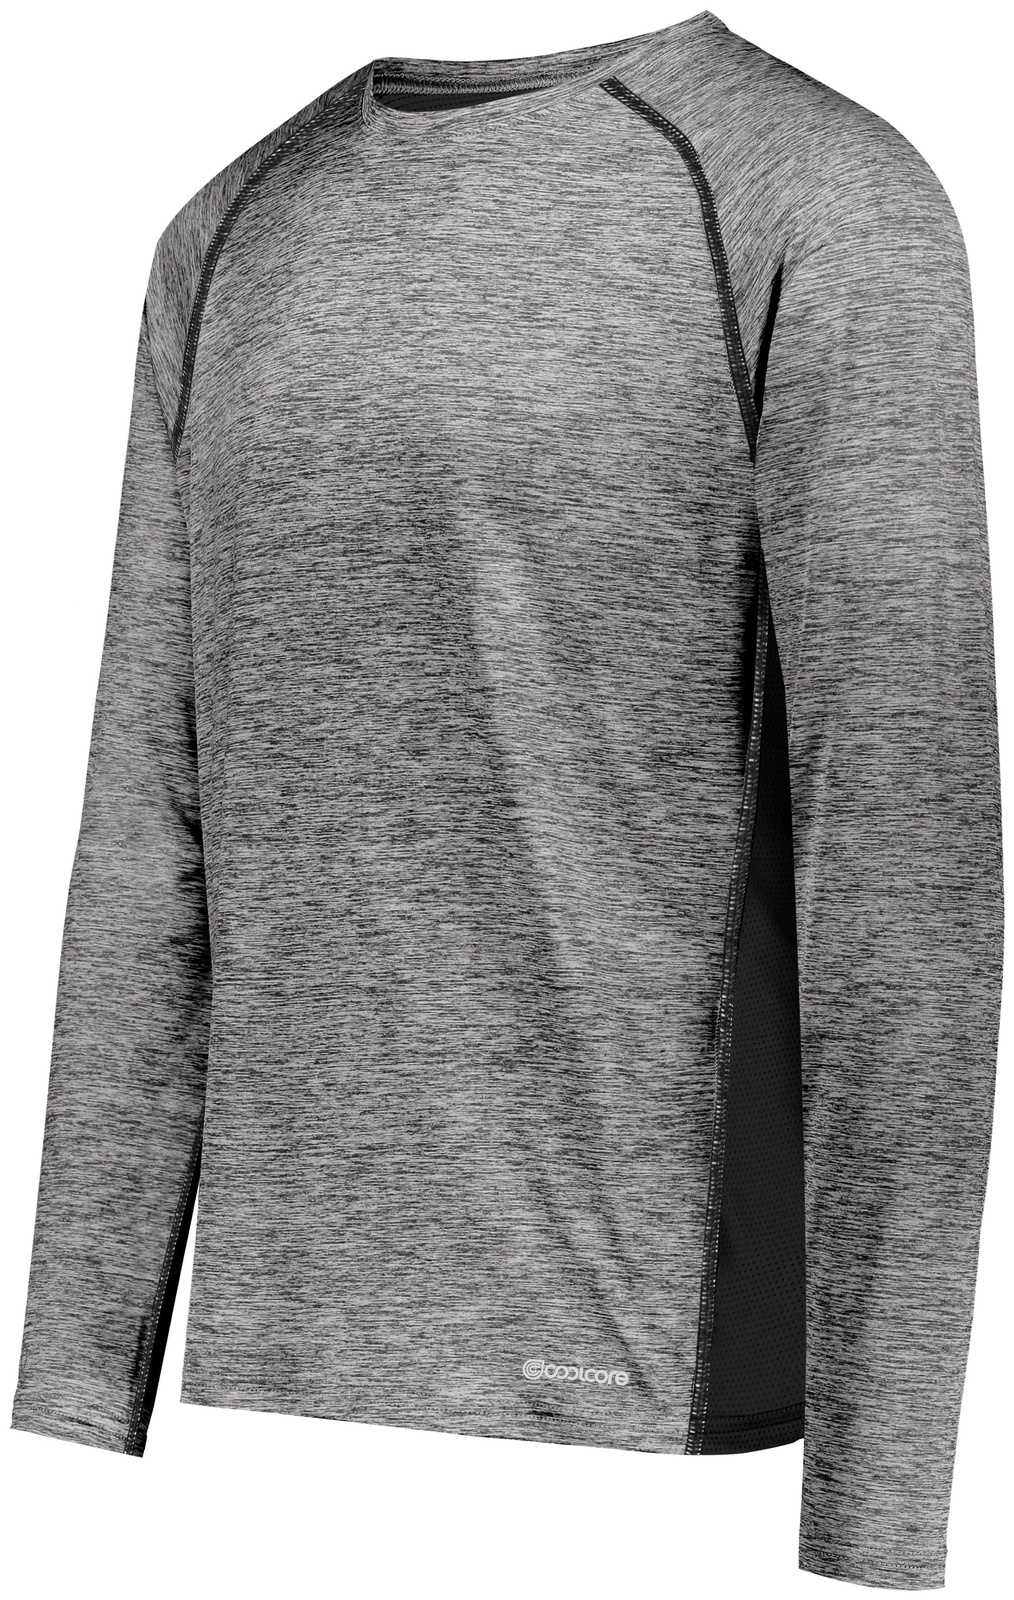 Holloway 222570 Electrify CoolCore Long Sleeve T-Shirt - Black Heather - HIT a Double